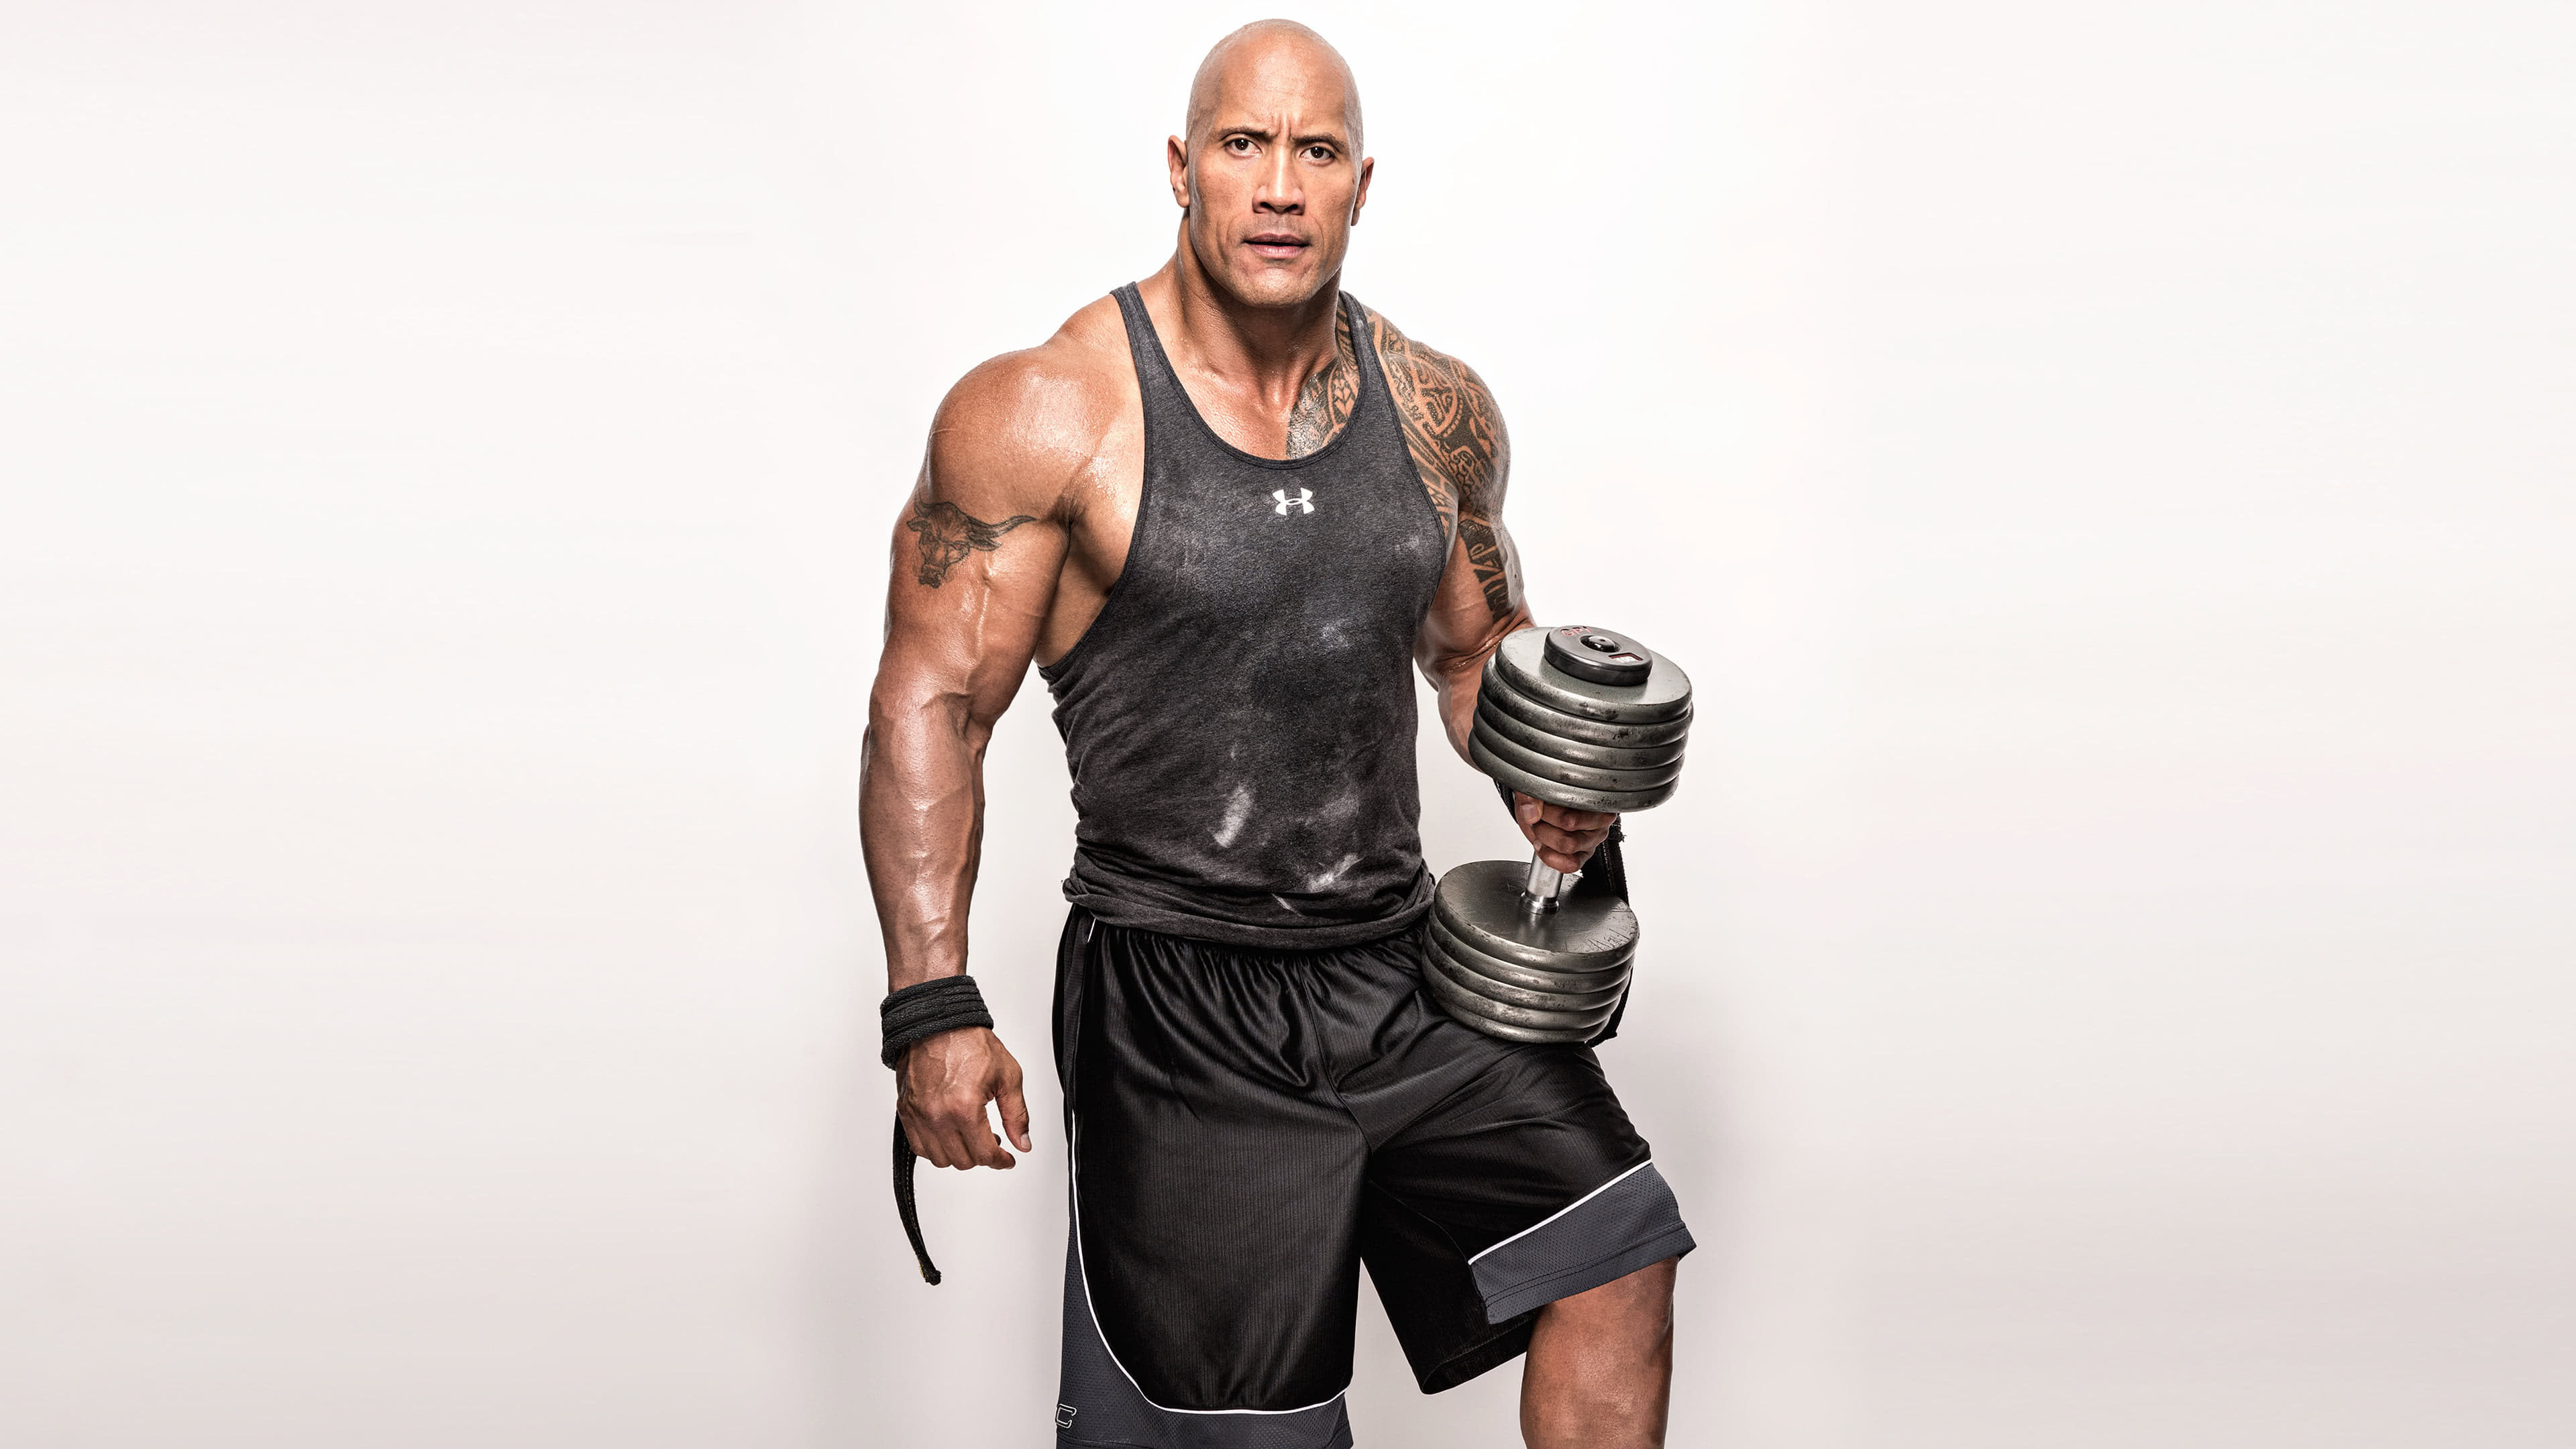 The Rock» 1080P, 2k, 4k HD wallpapers, backgrounds free download | Rare  Gallery